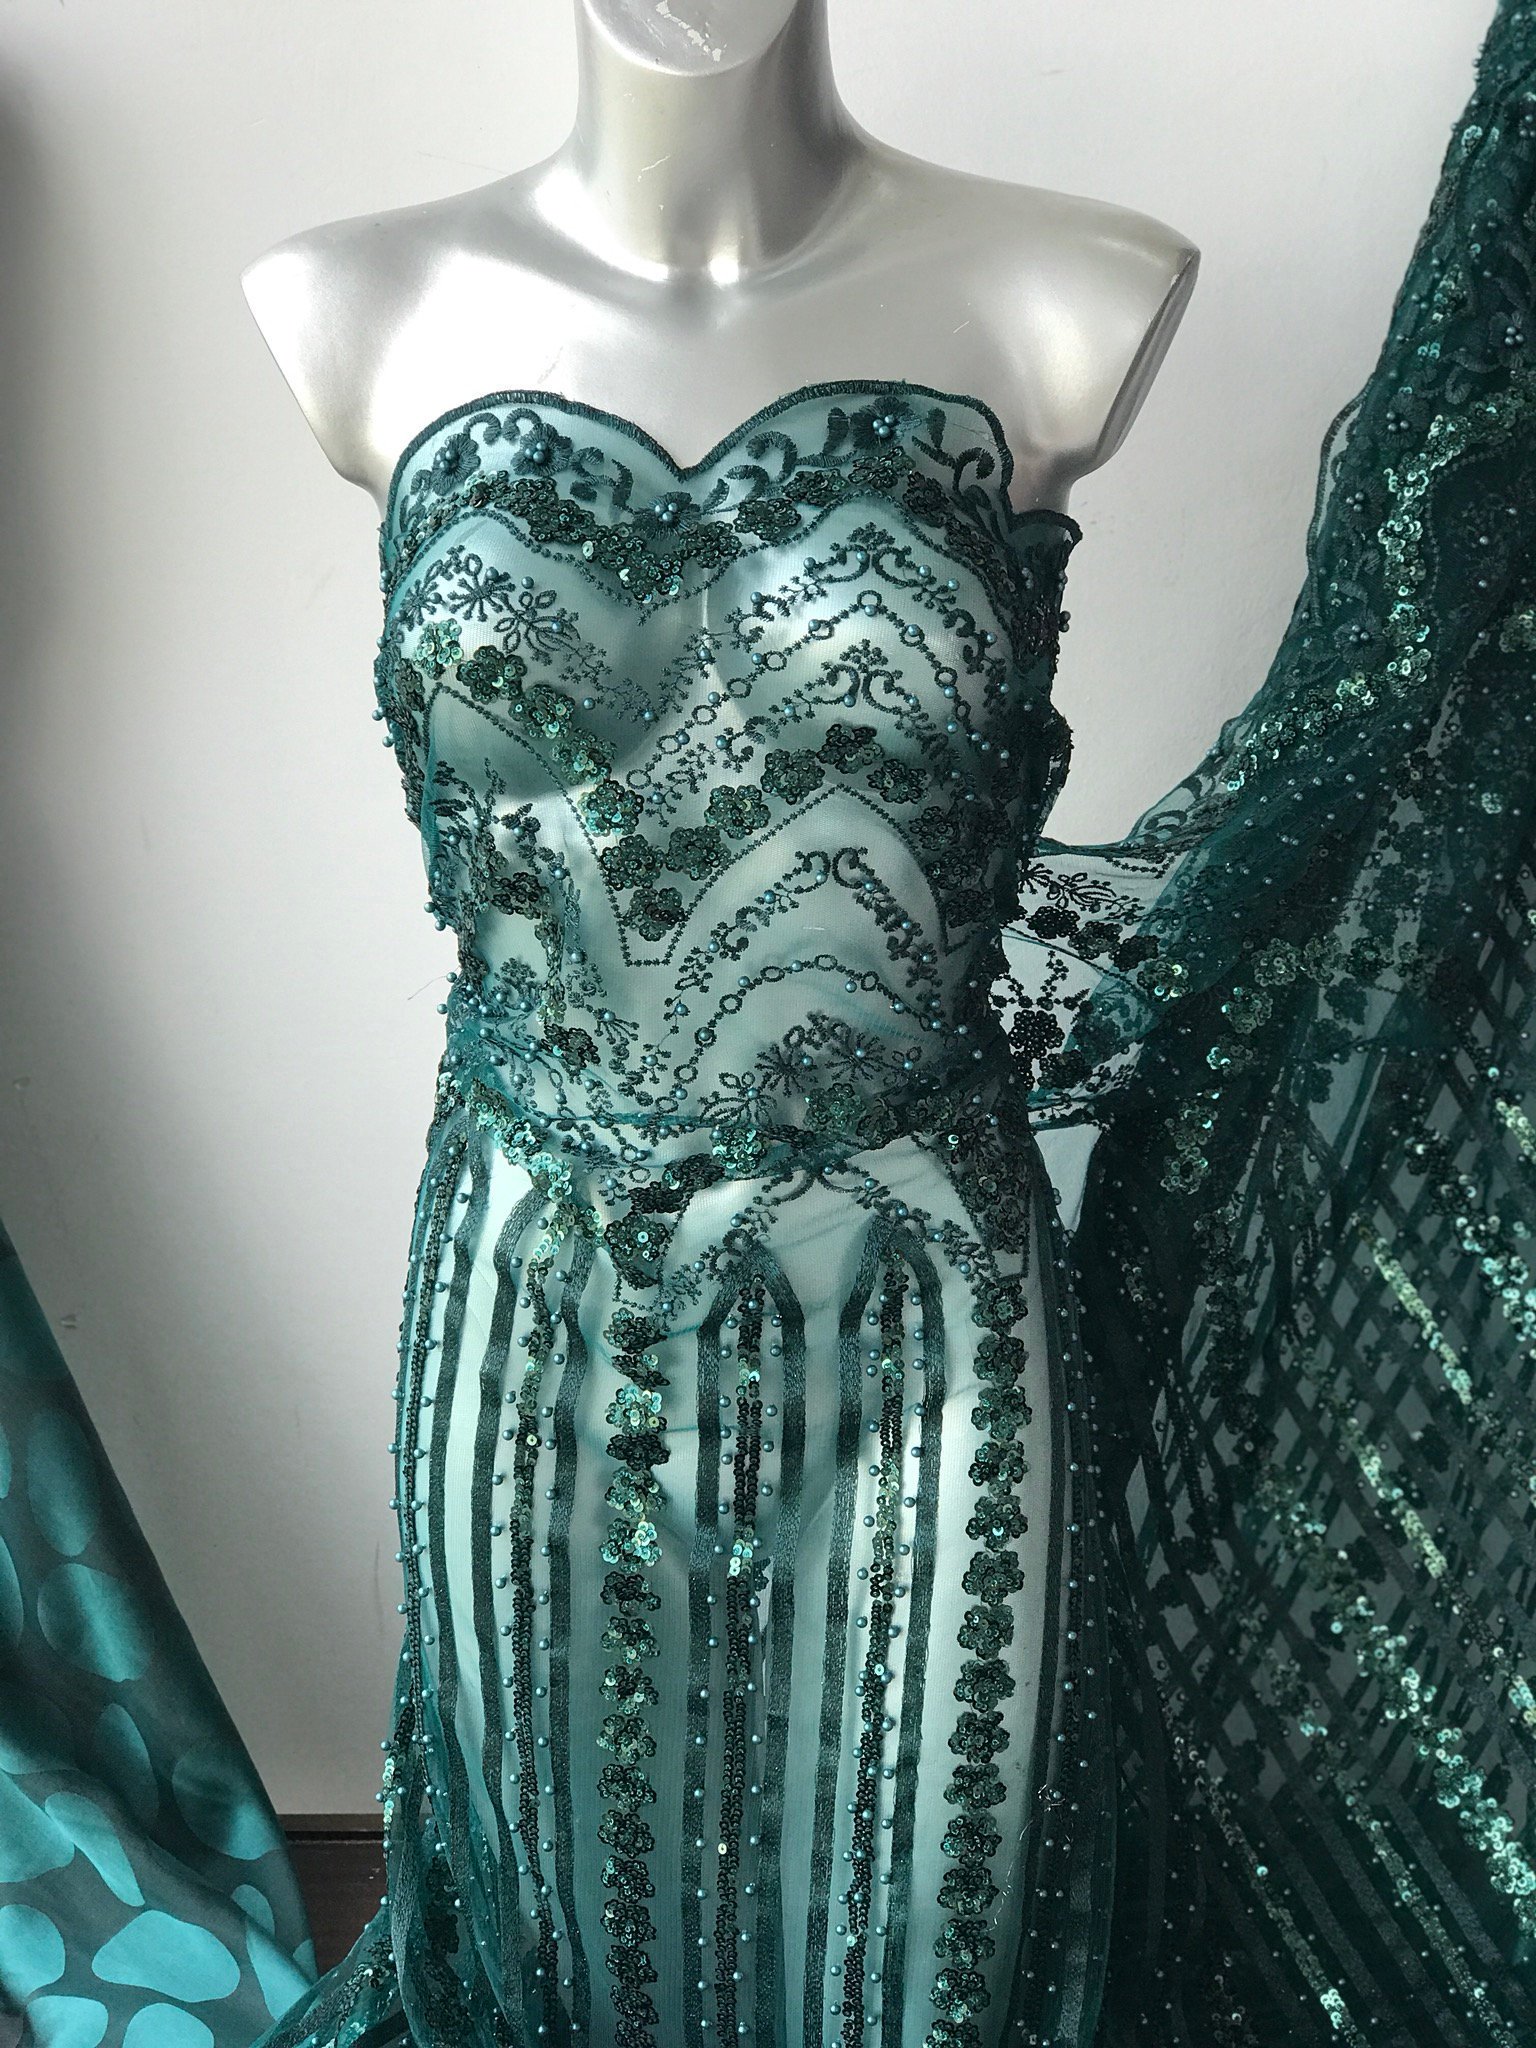 green beaded lace fabric